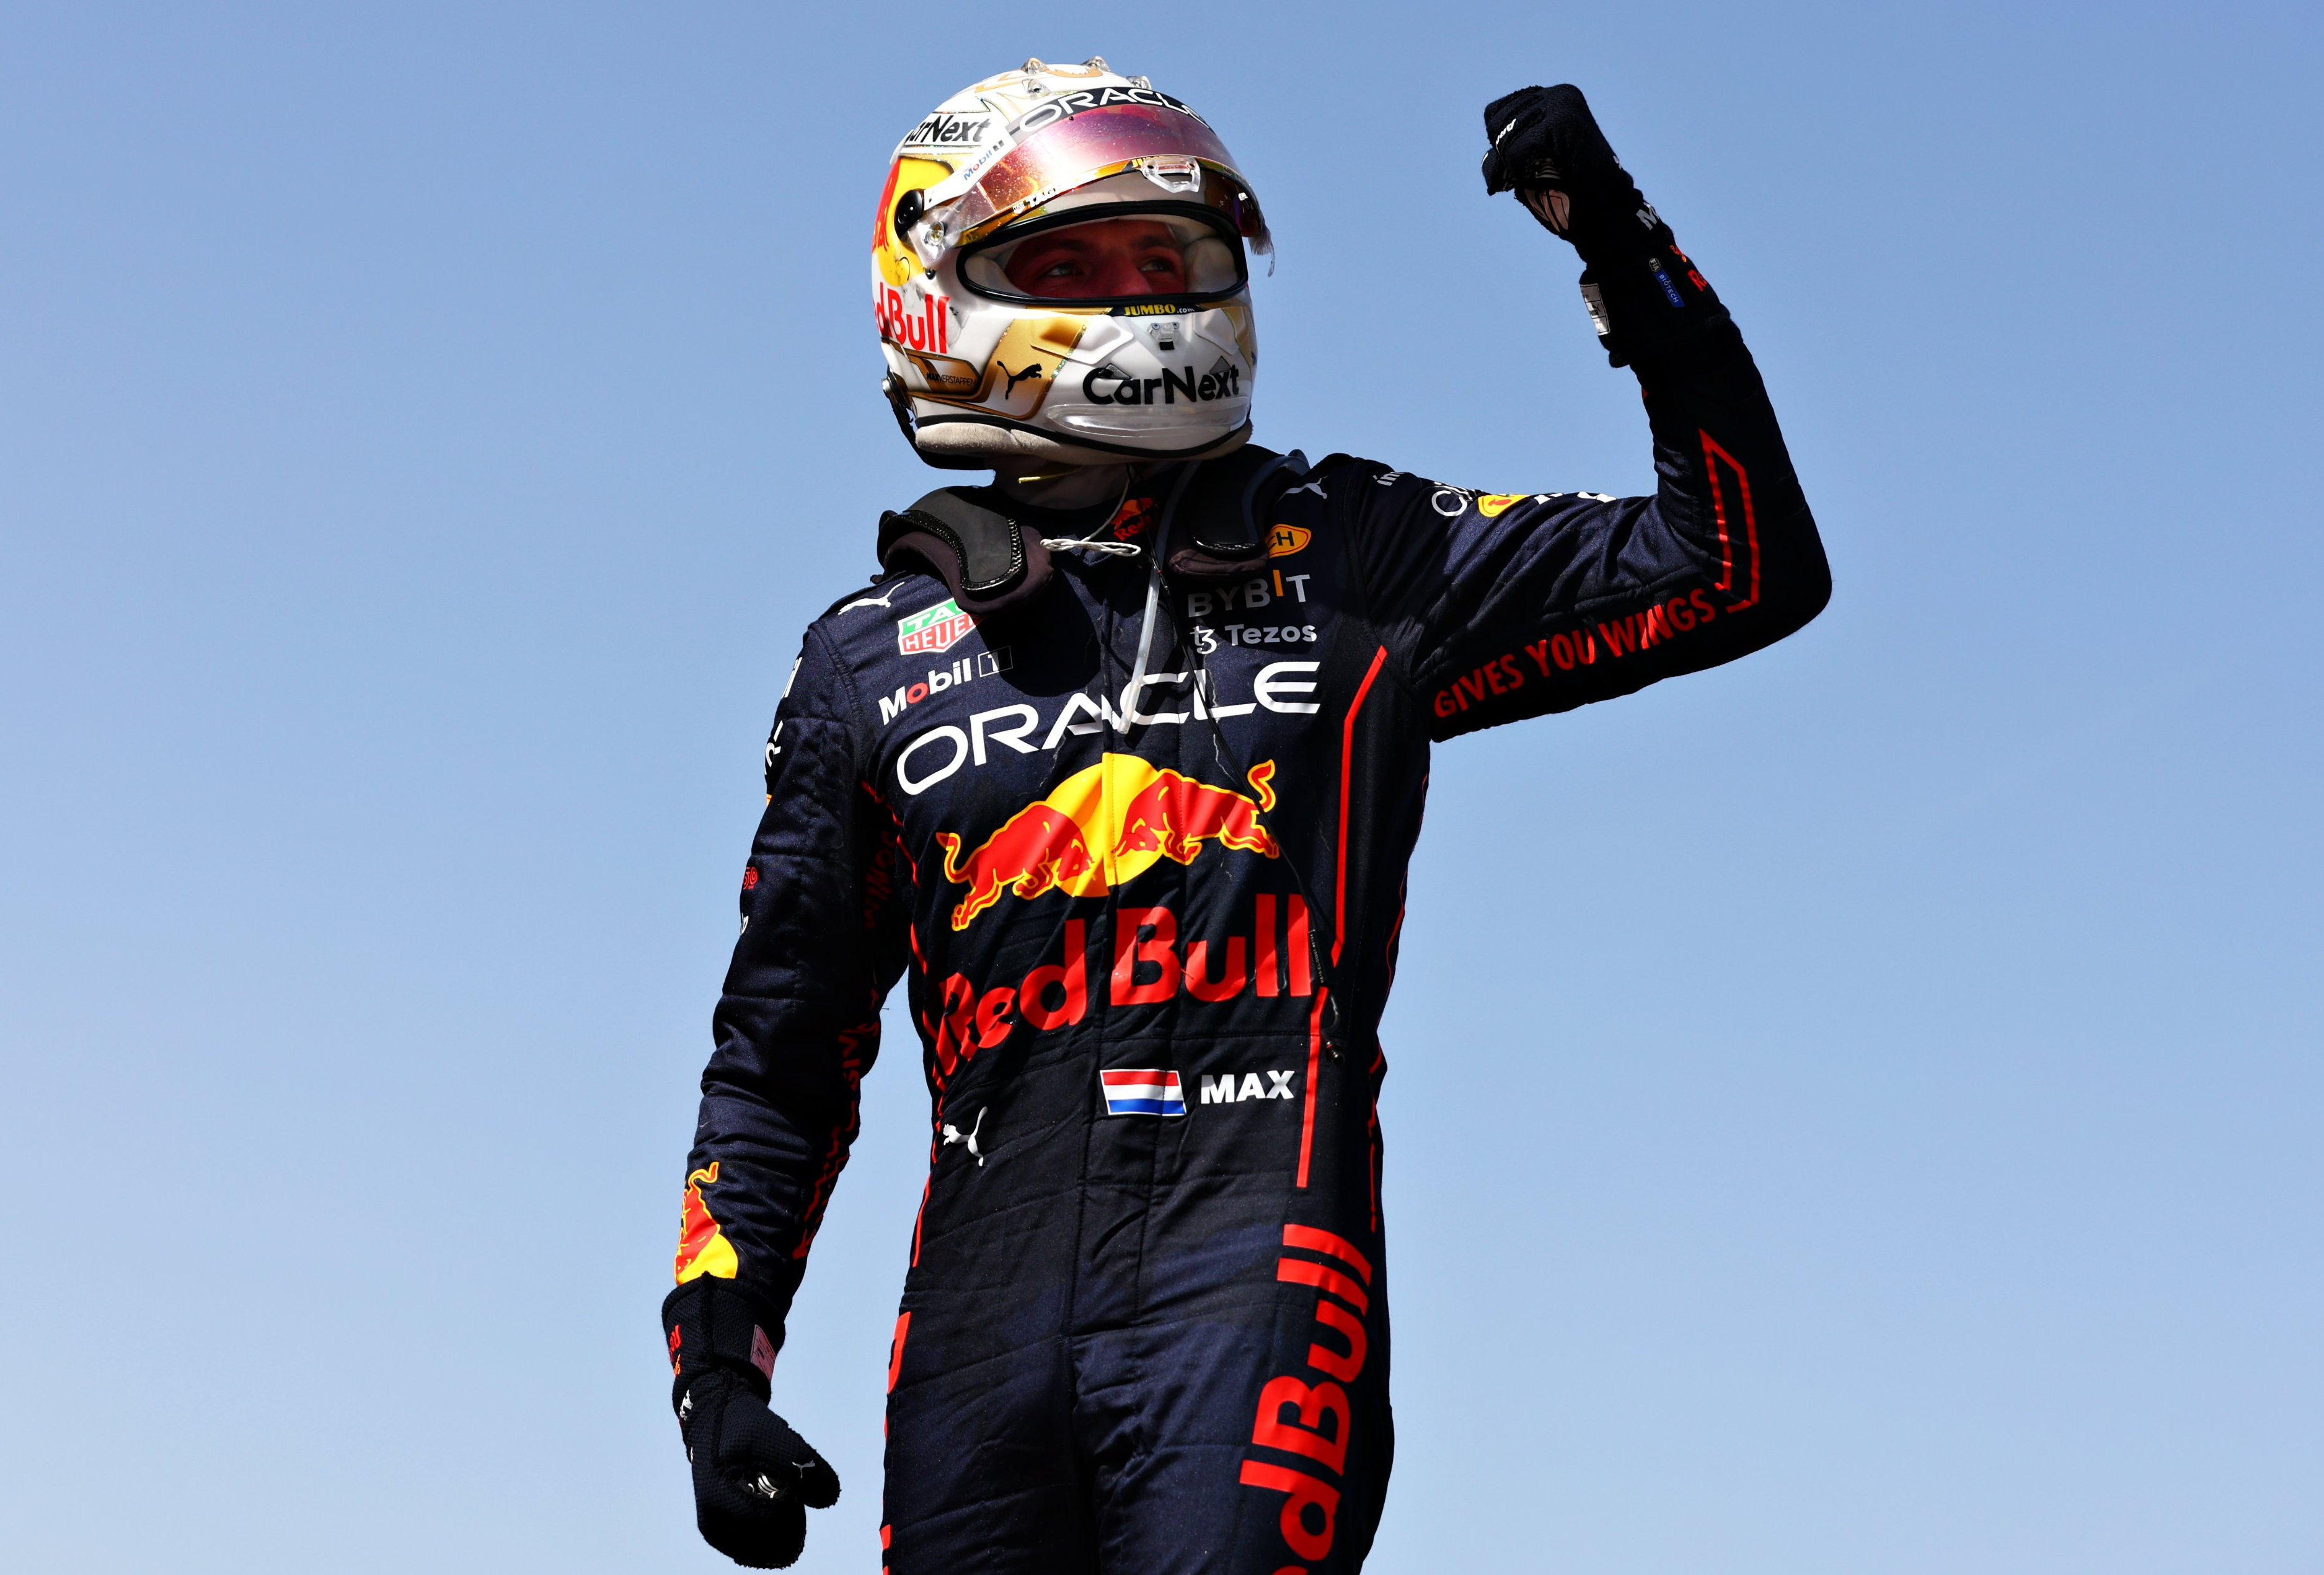 scheidsrechter Meestal Comorama Spanish Grand Prix: Max Verstappen wins to move above title rival Charles  Leclerc in F1 standings - after he is forced to retire - TIBS News